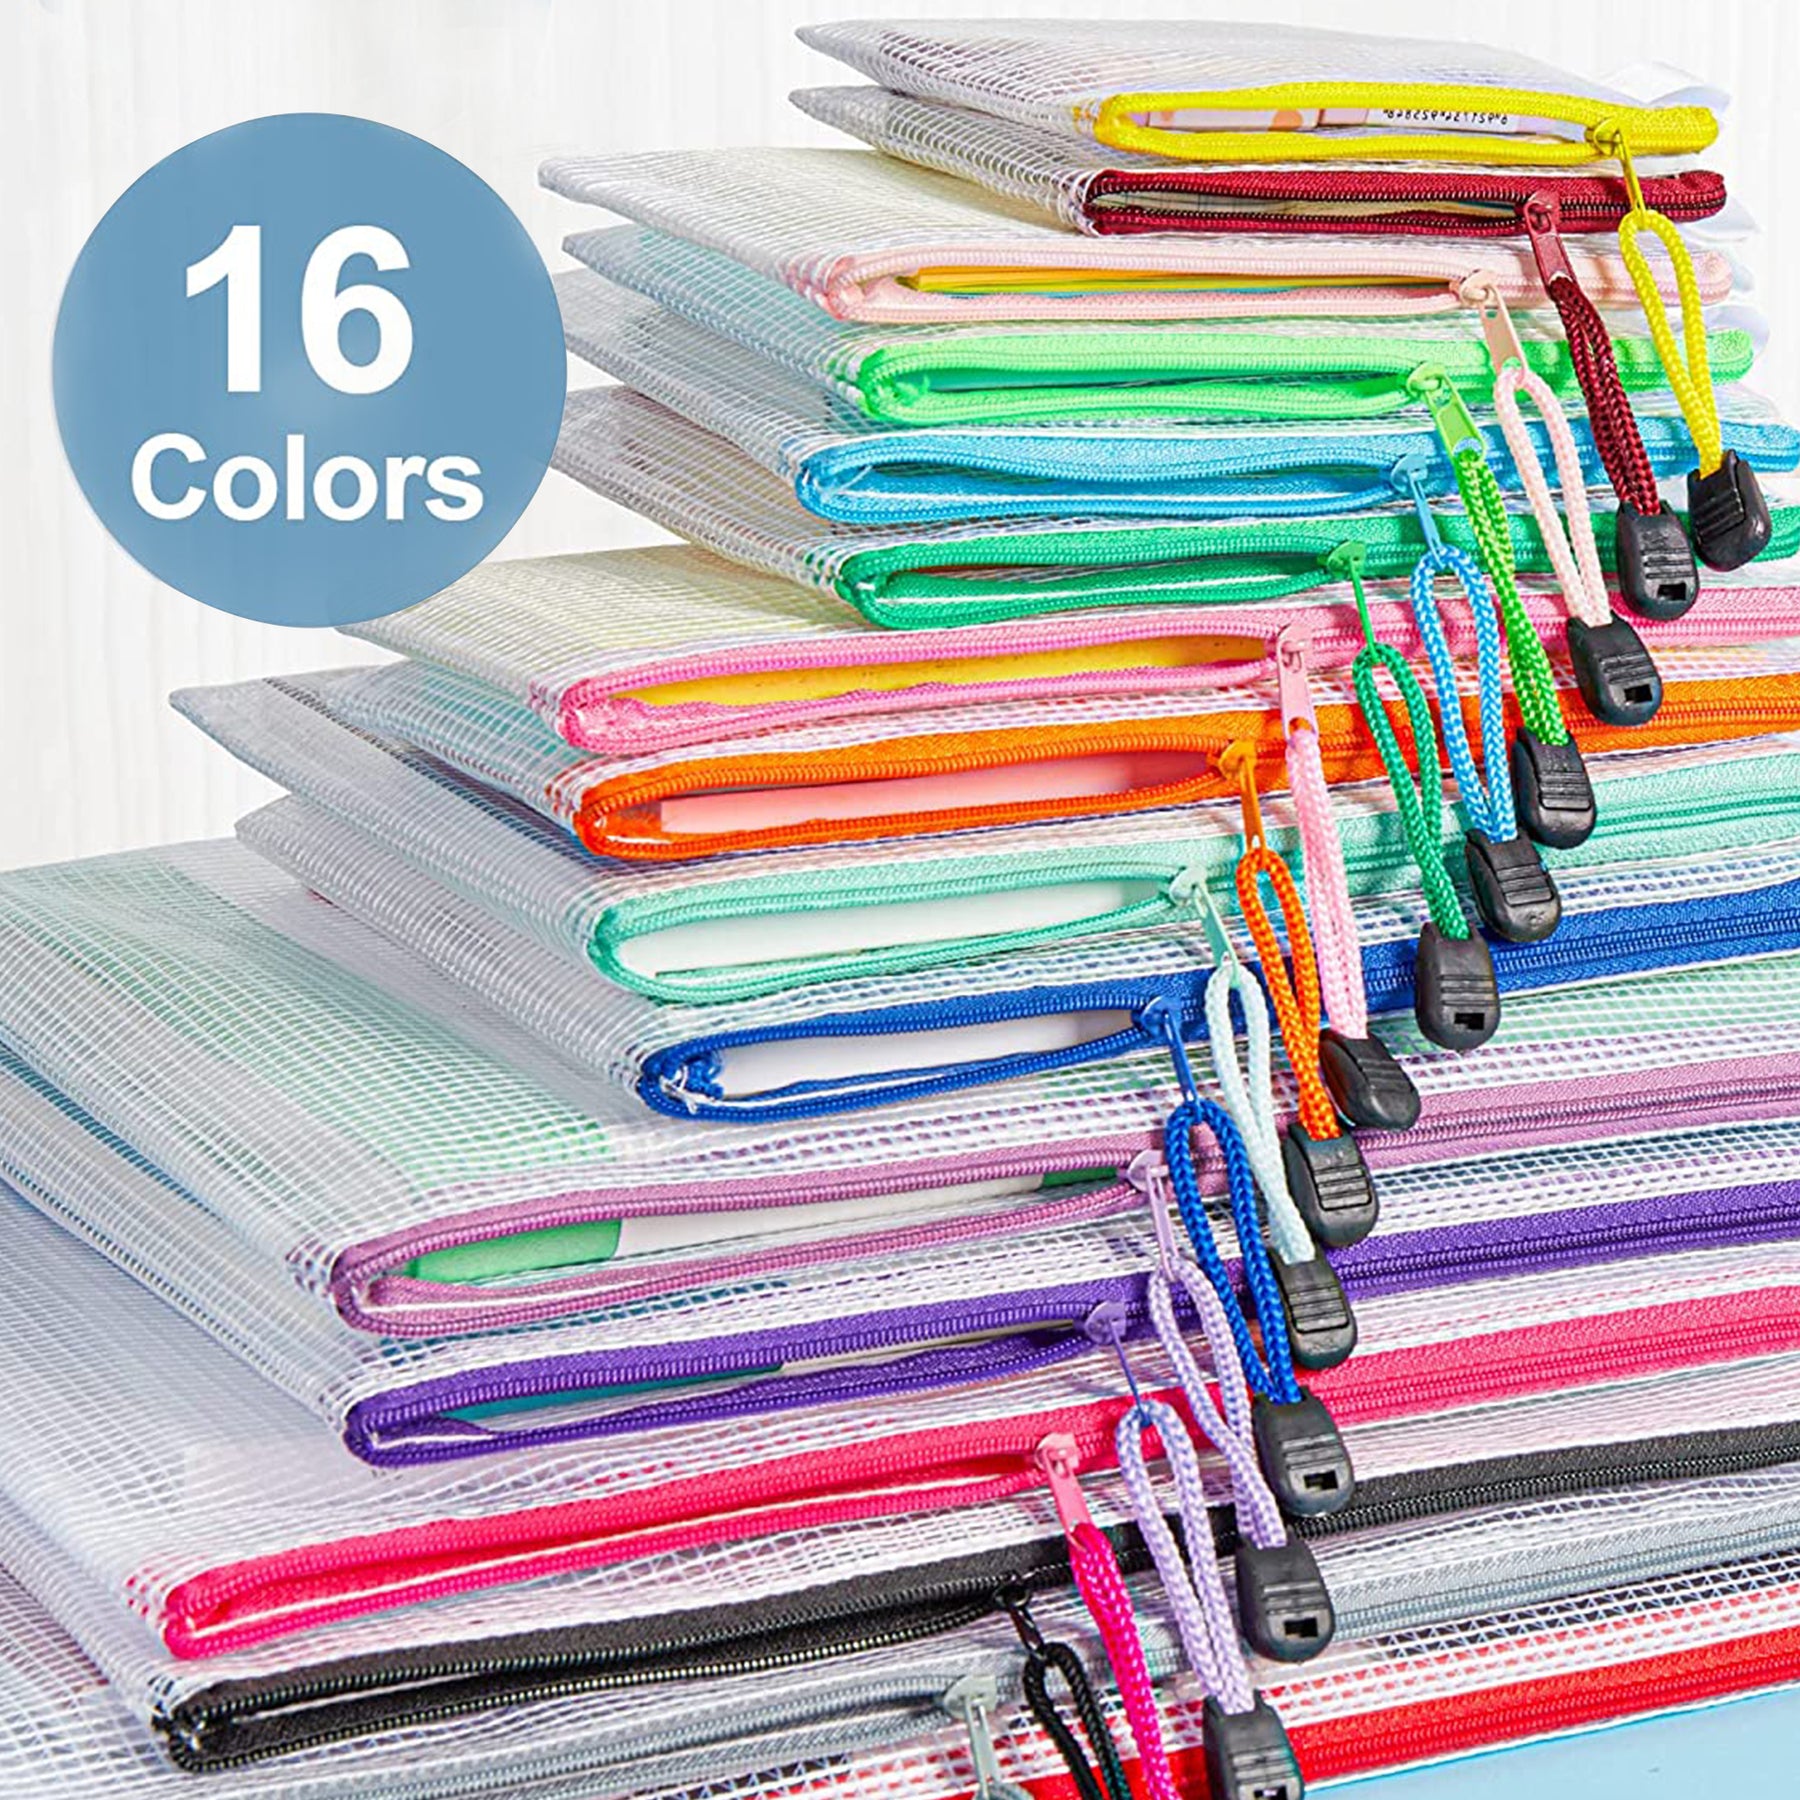 EOOUT 25pcs 8 Sizes, Mesh Zipper Pouch, 11 Colors, Waterproof Zip File  Document Folders, Travel Accessories, for Office School Supplies Board Game  Organizers an…